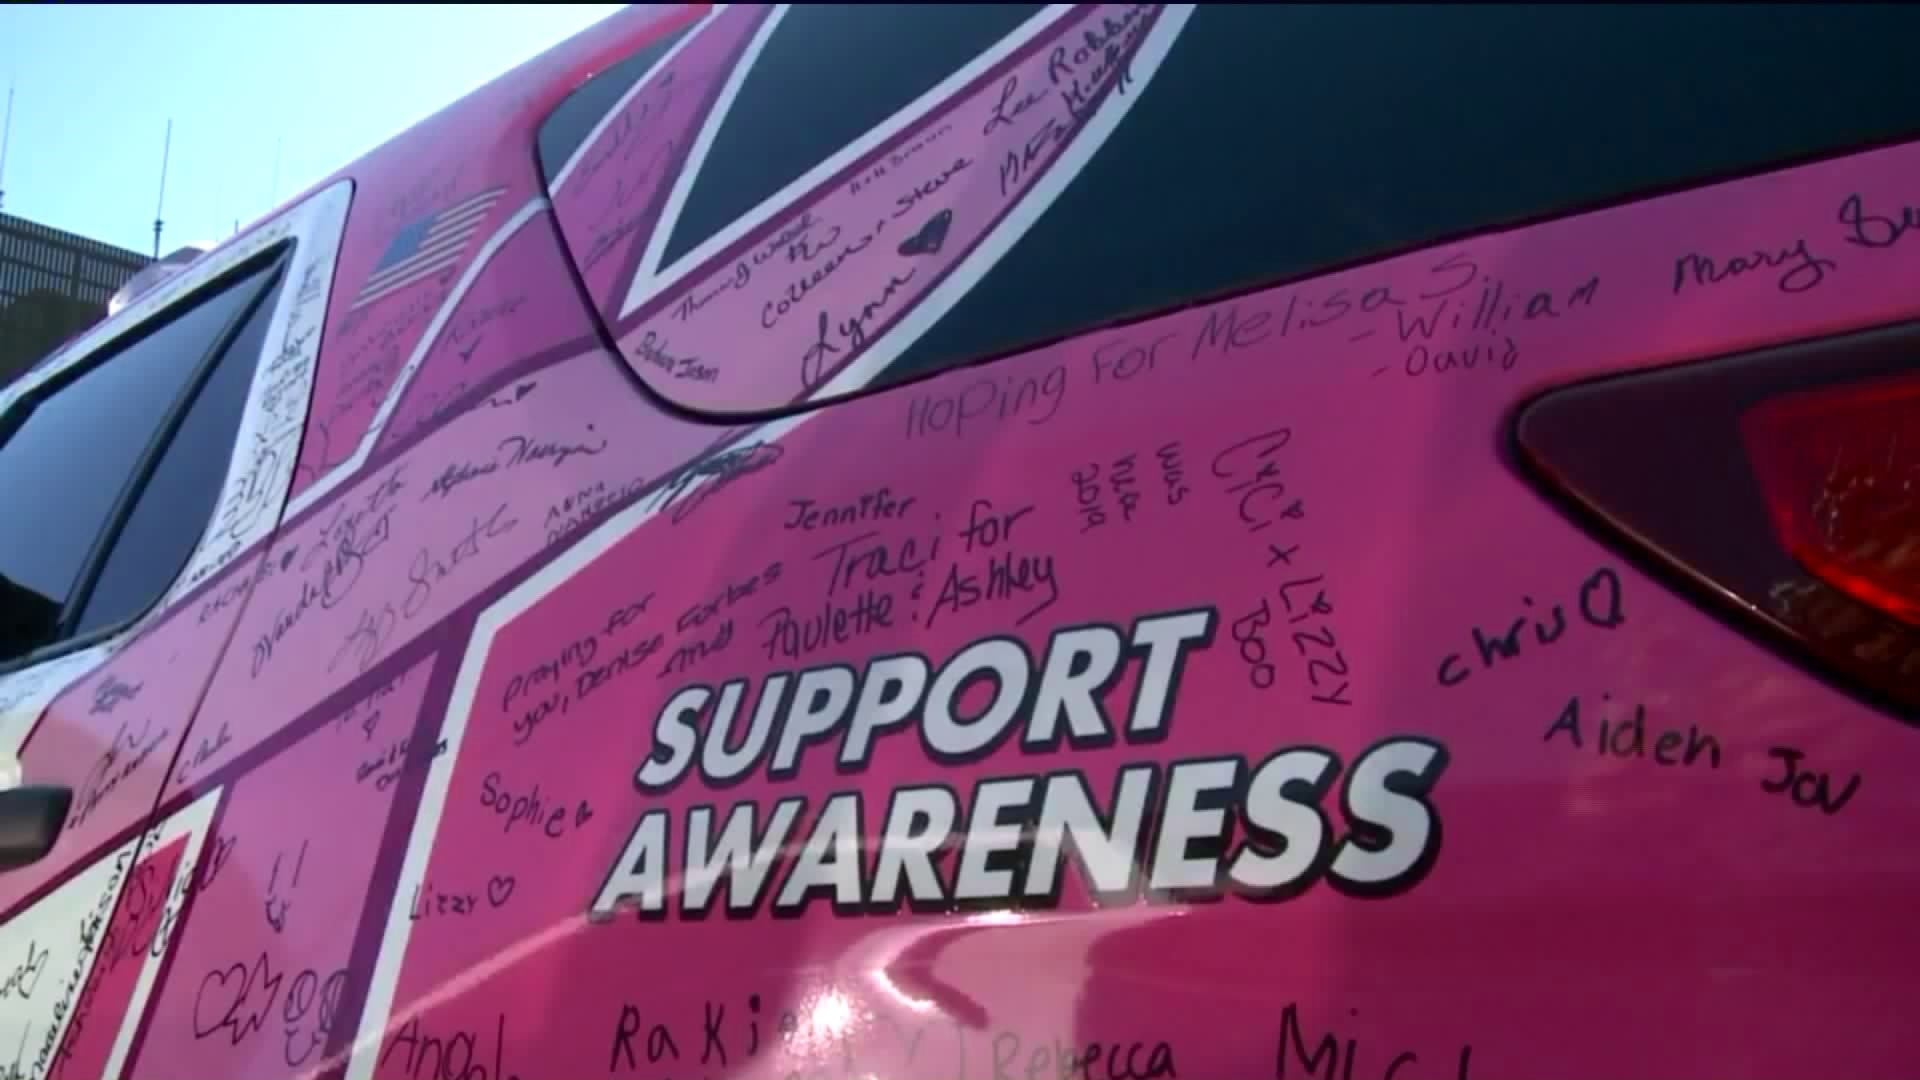 Police cruiser for breast cancer awareness defaced by vandals in Milford, CT